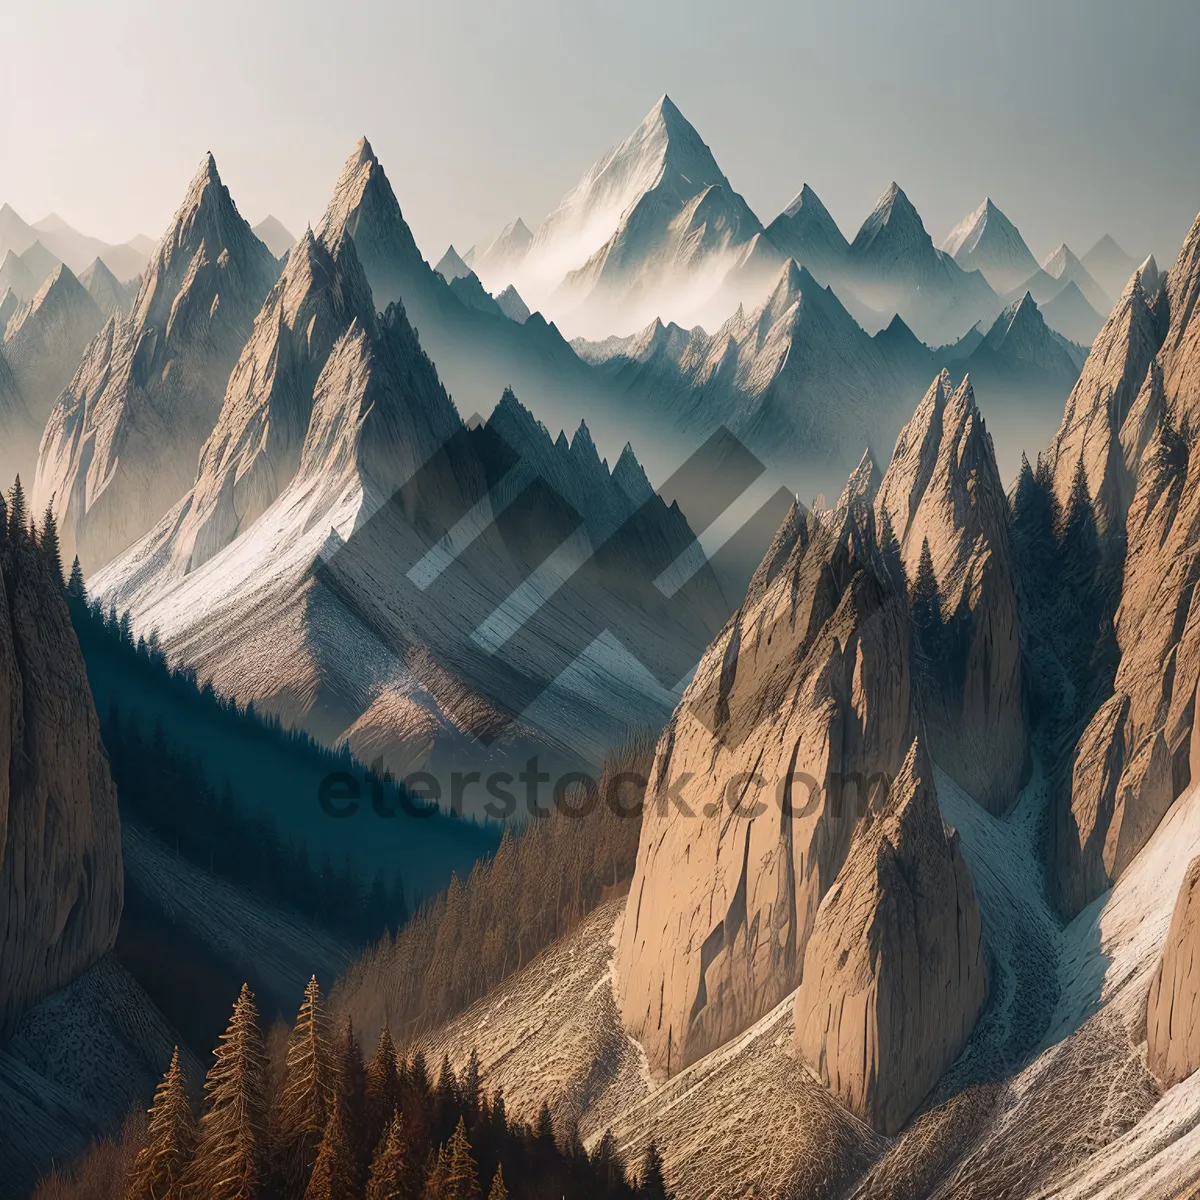 Picture of Majestic Canyon in Snow-Capped Mountains